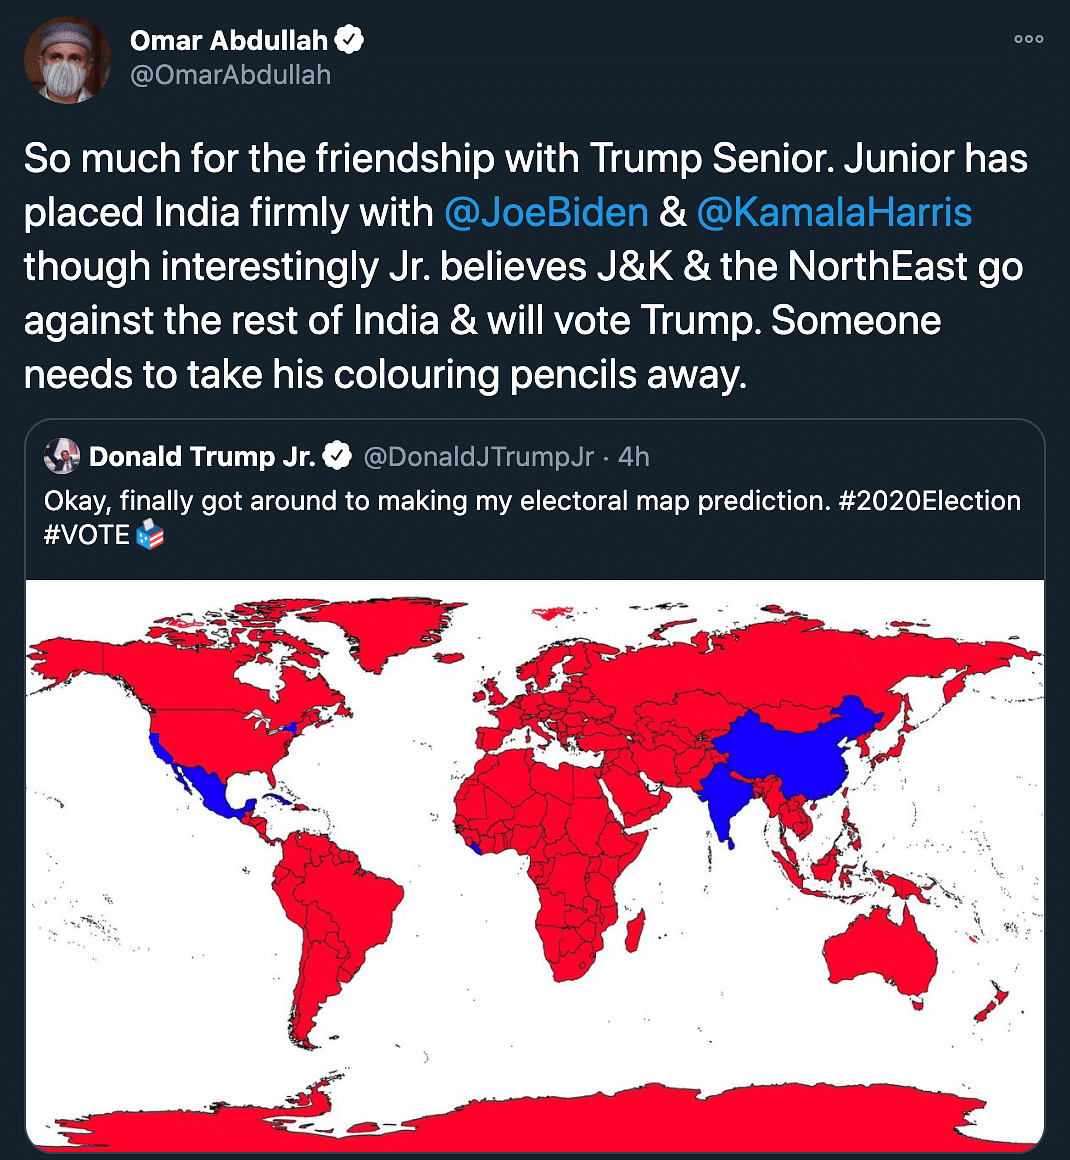 Trump Jr’s world electoral map was slammed by Indian political leaders, including Shashi Tharoor and Omar Abdullah.